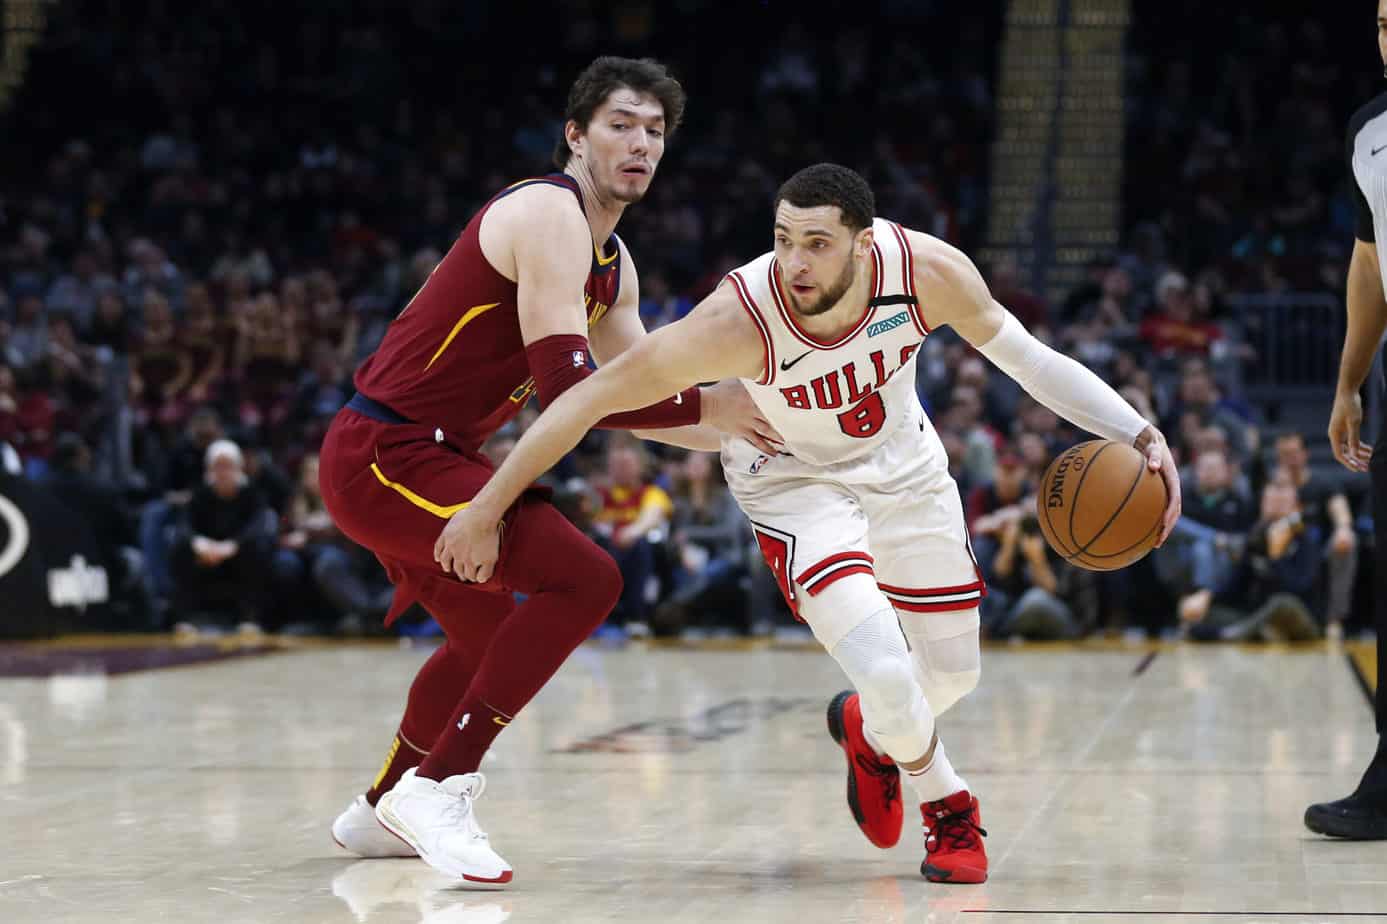 Chicago Bulls (101) vs. Cleveland Cavaliers (91) – Results